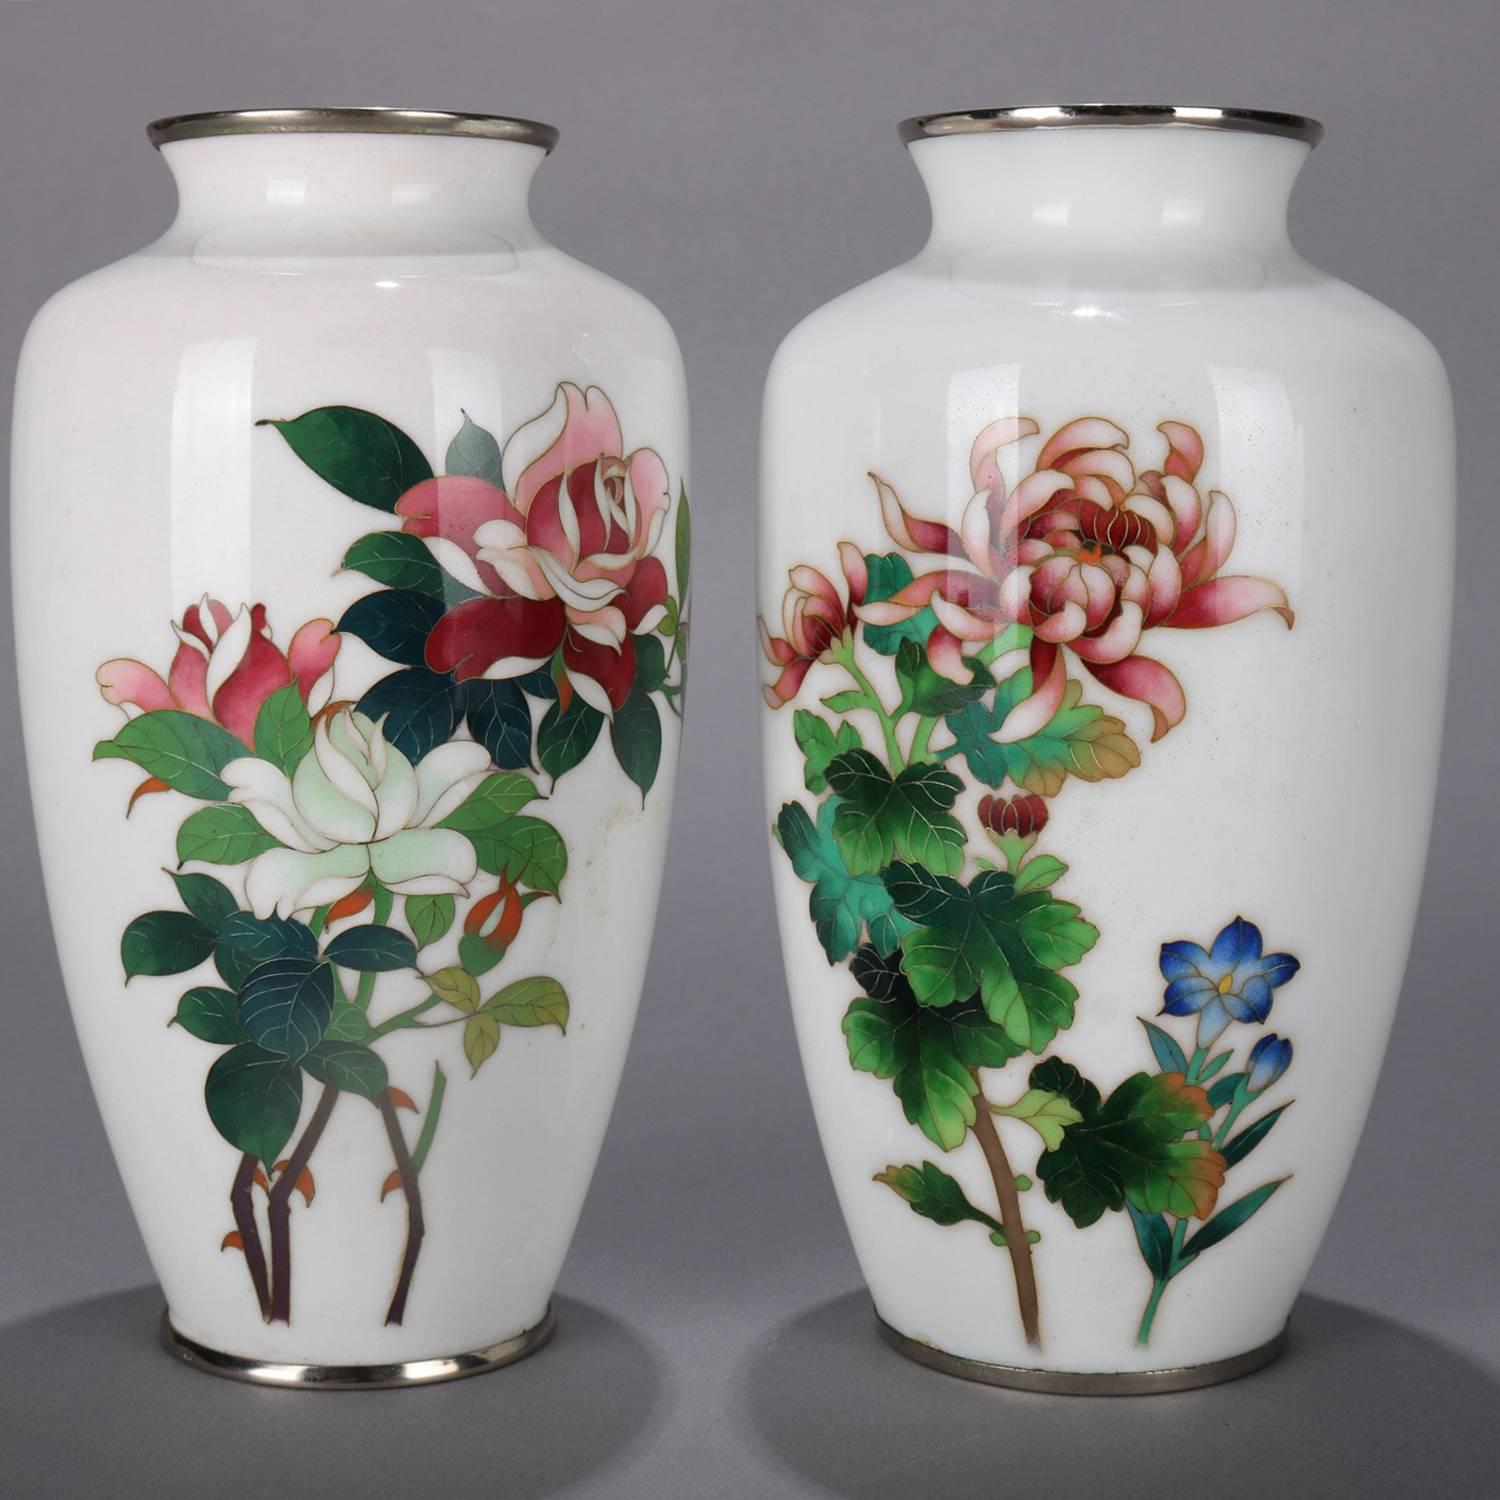 Pair of Japanese cabinet vases feature floral design with cloisonné enameled roses and chrysanthemum in white ground, marked on base 